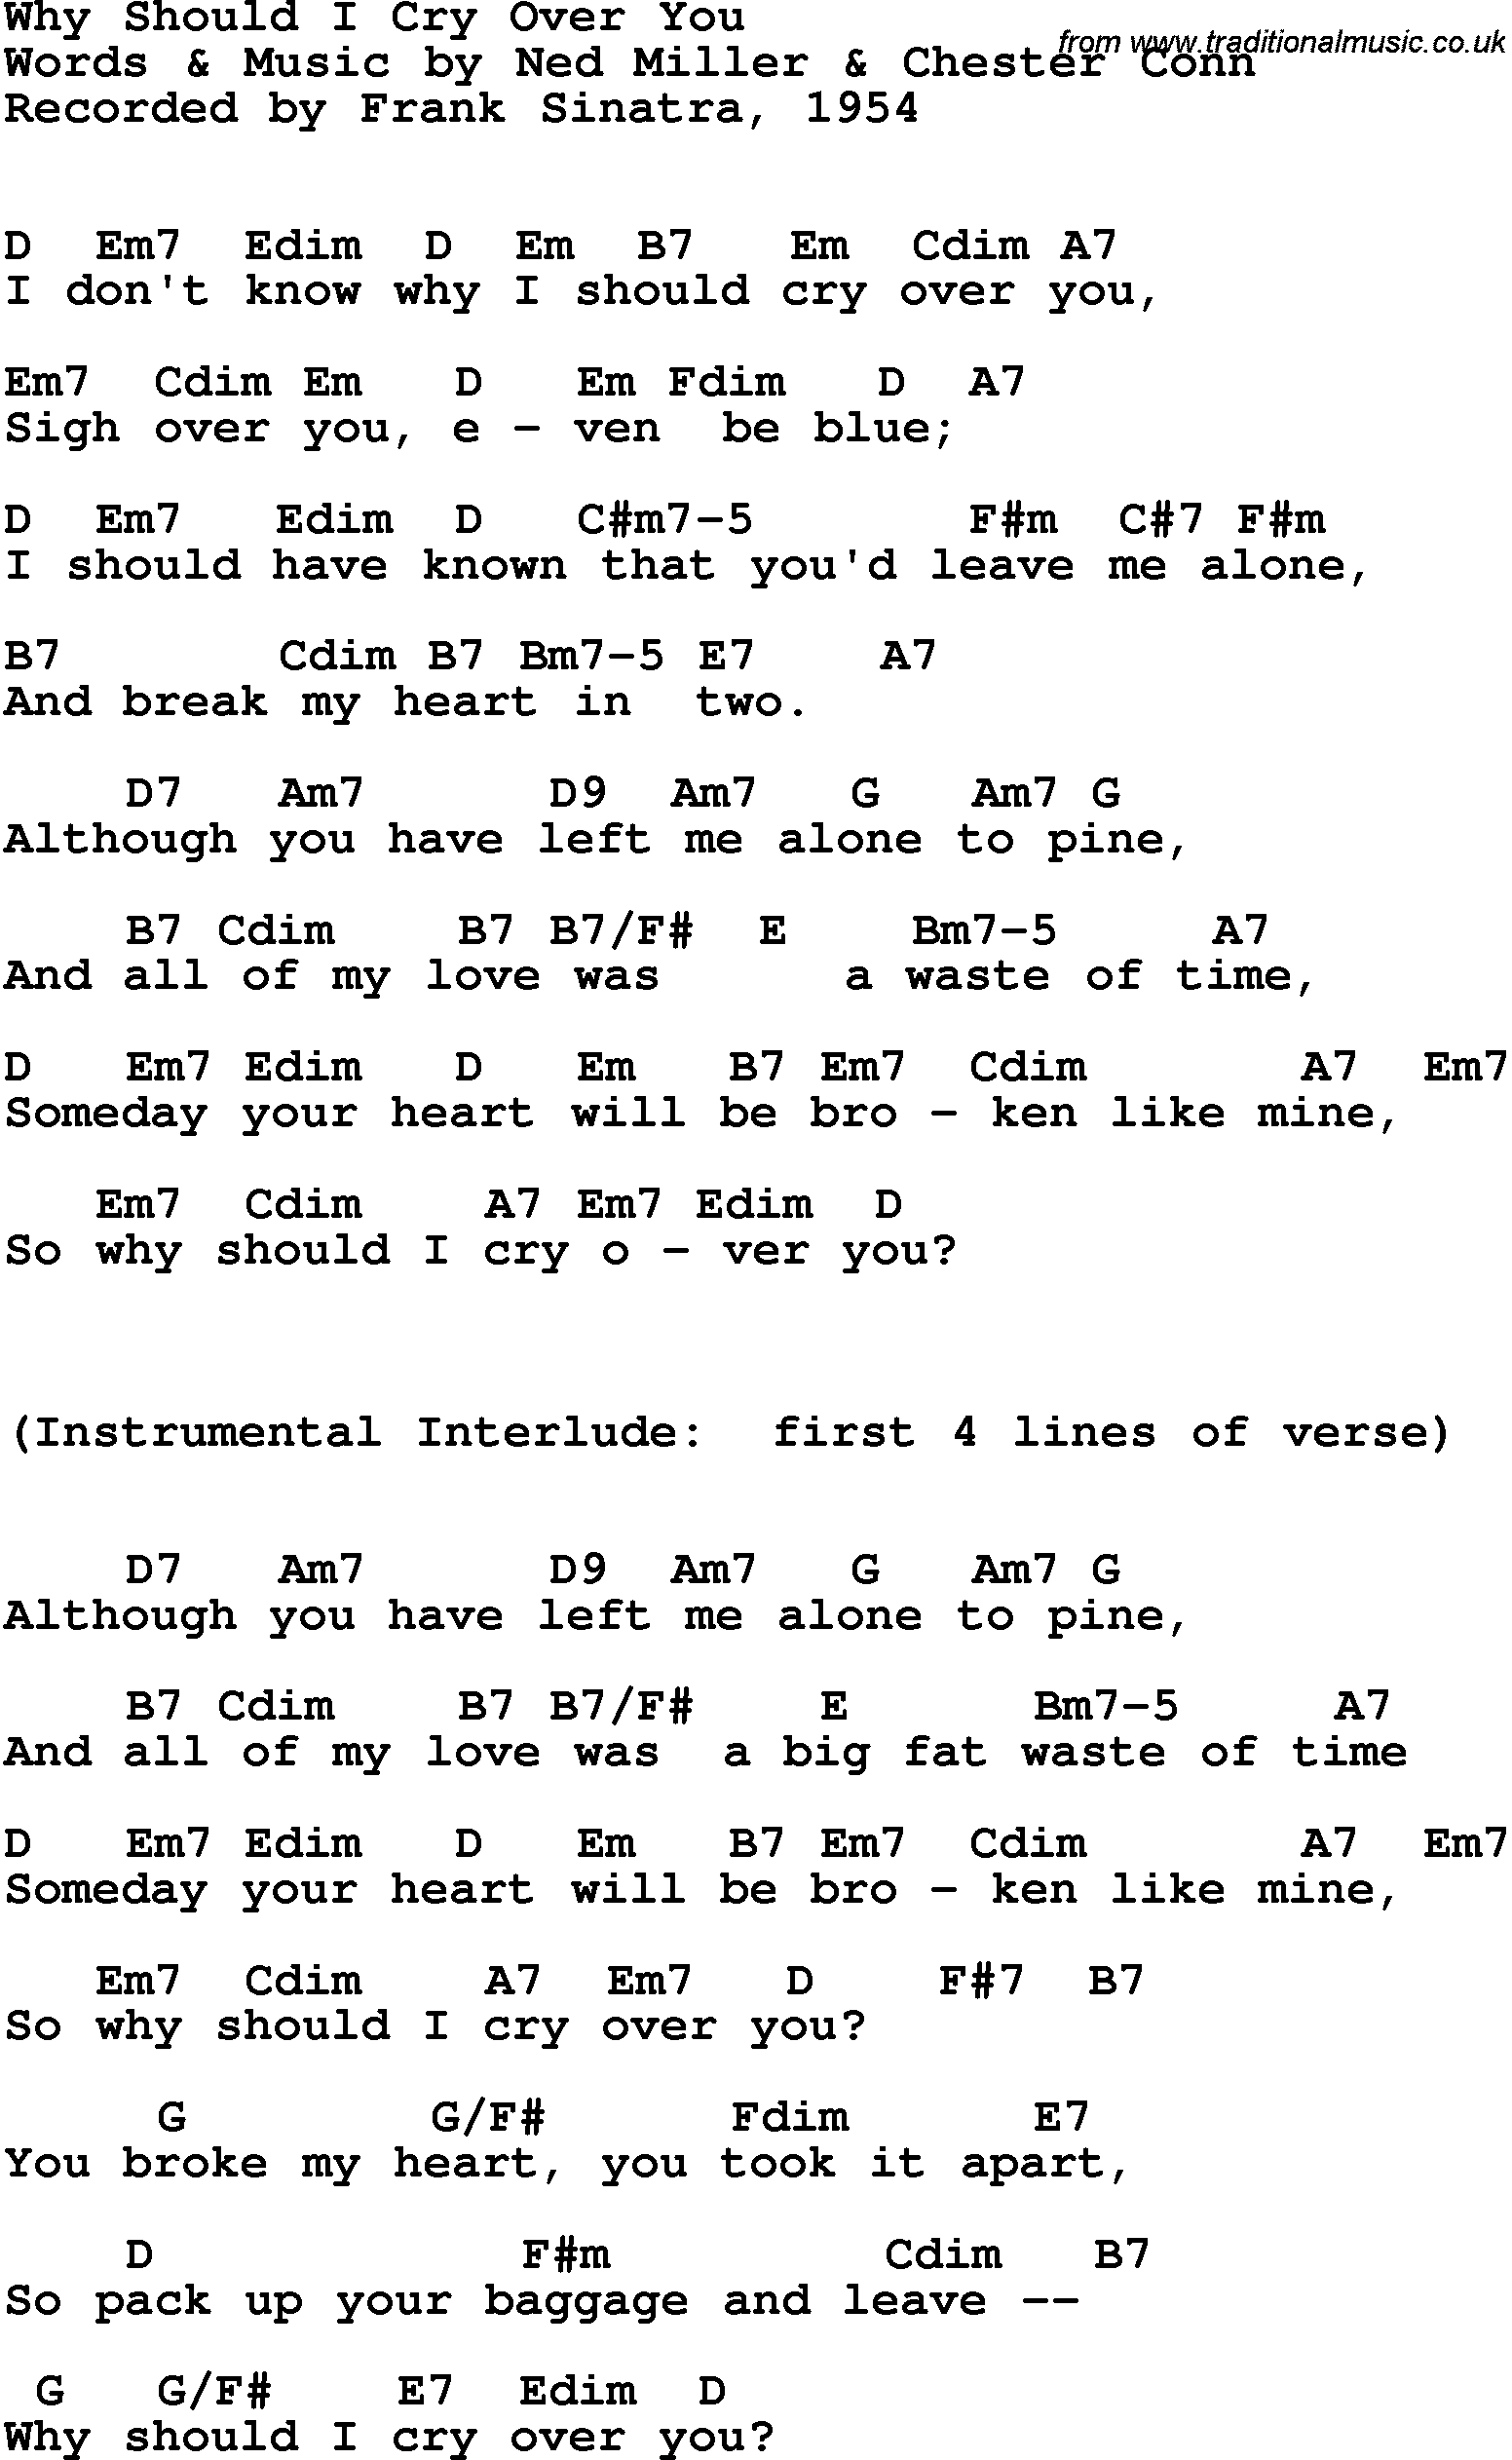 Song Lyrics with guitar chords for Why Should I Cry Over You - Frank Sinatra, 1954